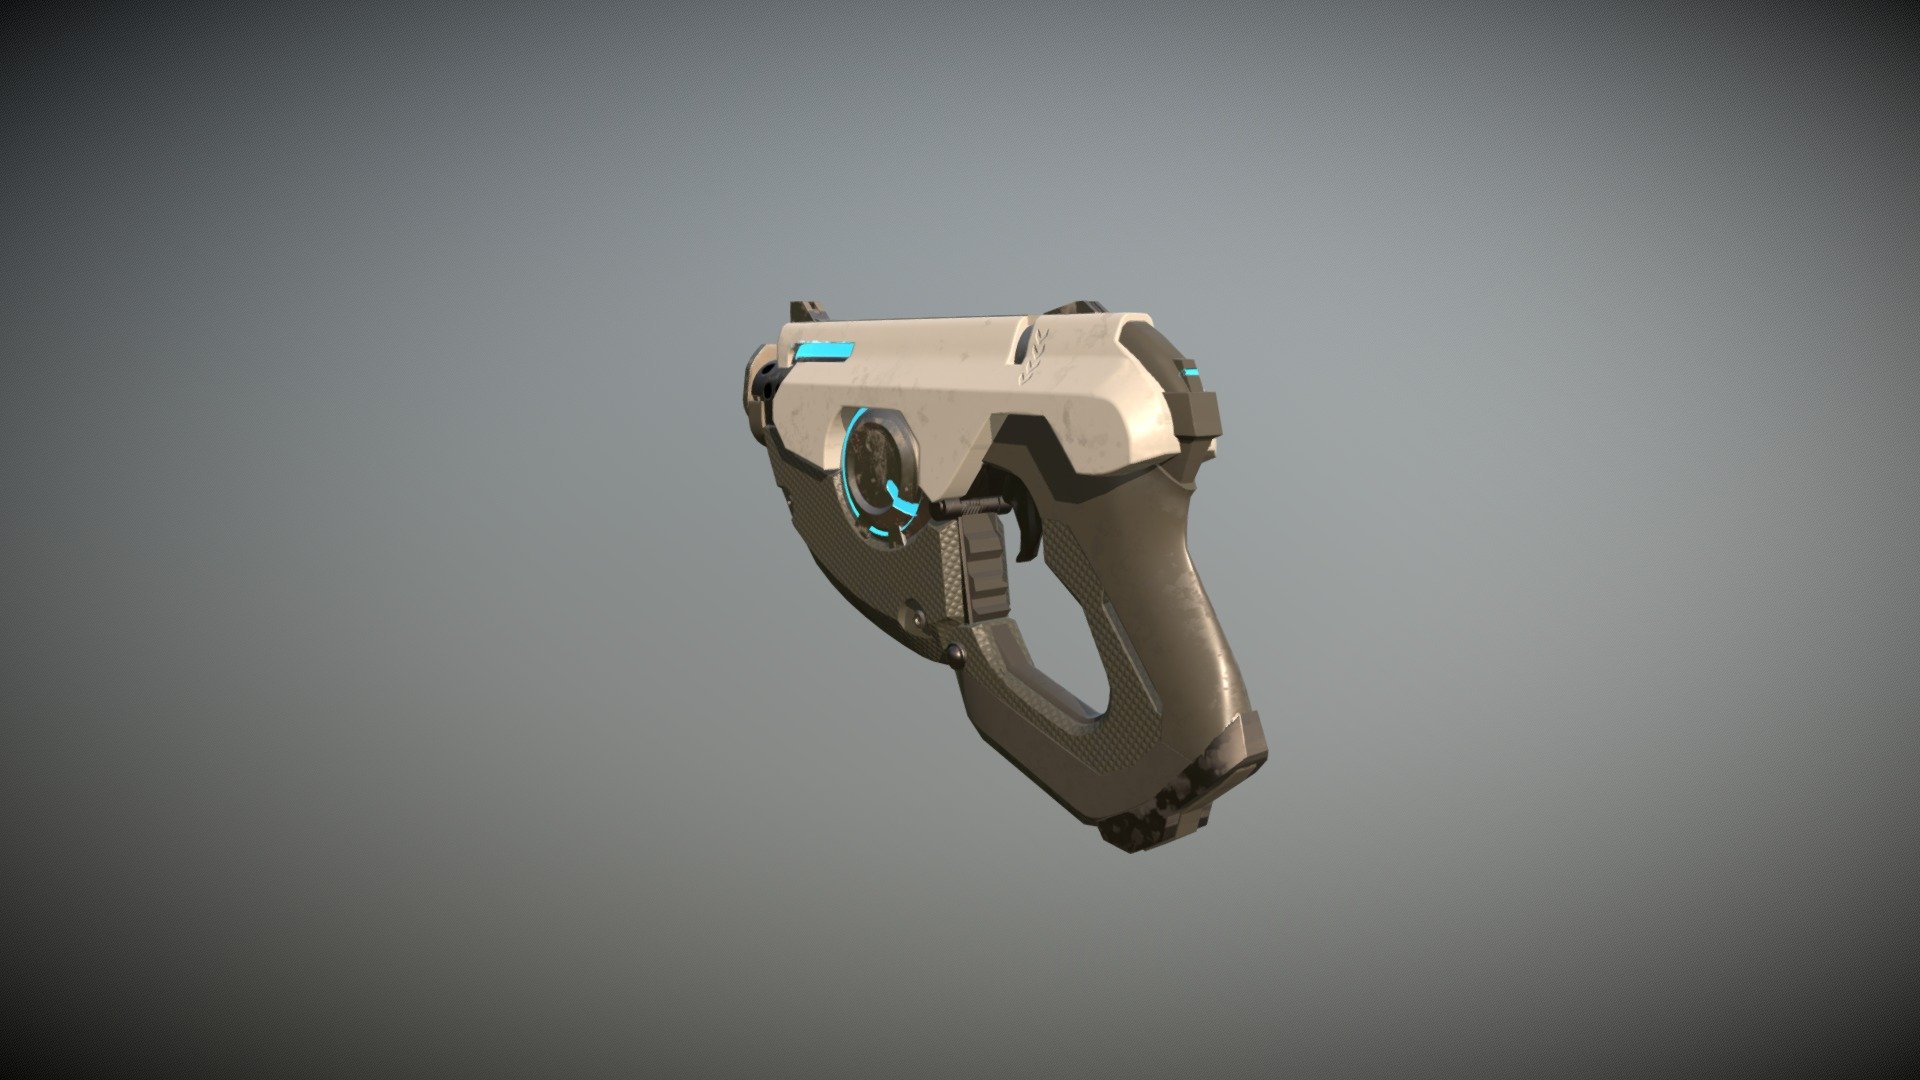 SCI-FI Blaster handgun low-poly 3d model ready for Virtual Reality (VR), Augmented Reality (AR), games and other real-time apps.

This is a Game-ready 3D SCI-FI Blaster handgun,made in Blender 2.79,textured in Substance painter and rendered in Blender cycles.
features:
Verts:5,680
Faces:5,856
Not rigged but riggable parts are separated.
All Textures are in 2k(2048x2048) and they include
Albedo map
Emission map
Normal map
3D model has been tested in Unity engine 5.
Note: Model can be used for Games,Advertisement,Movies and so on 3d model